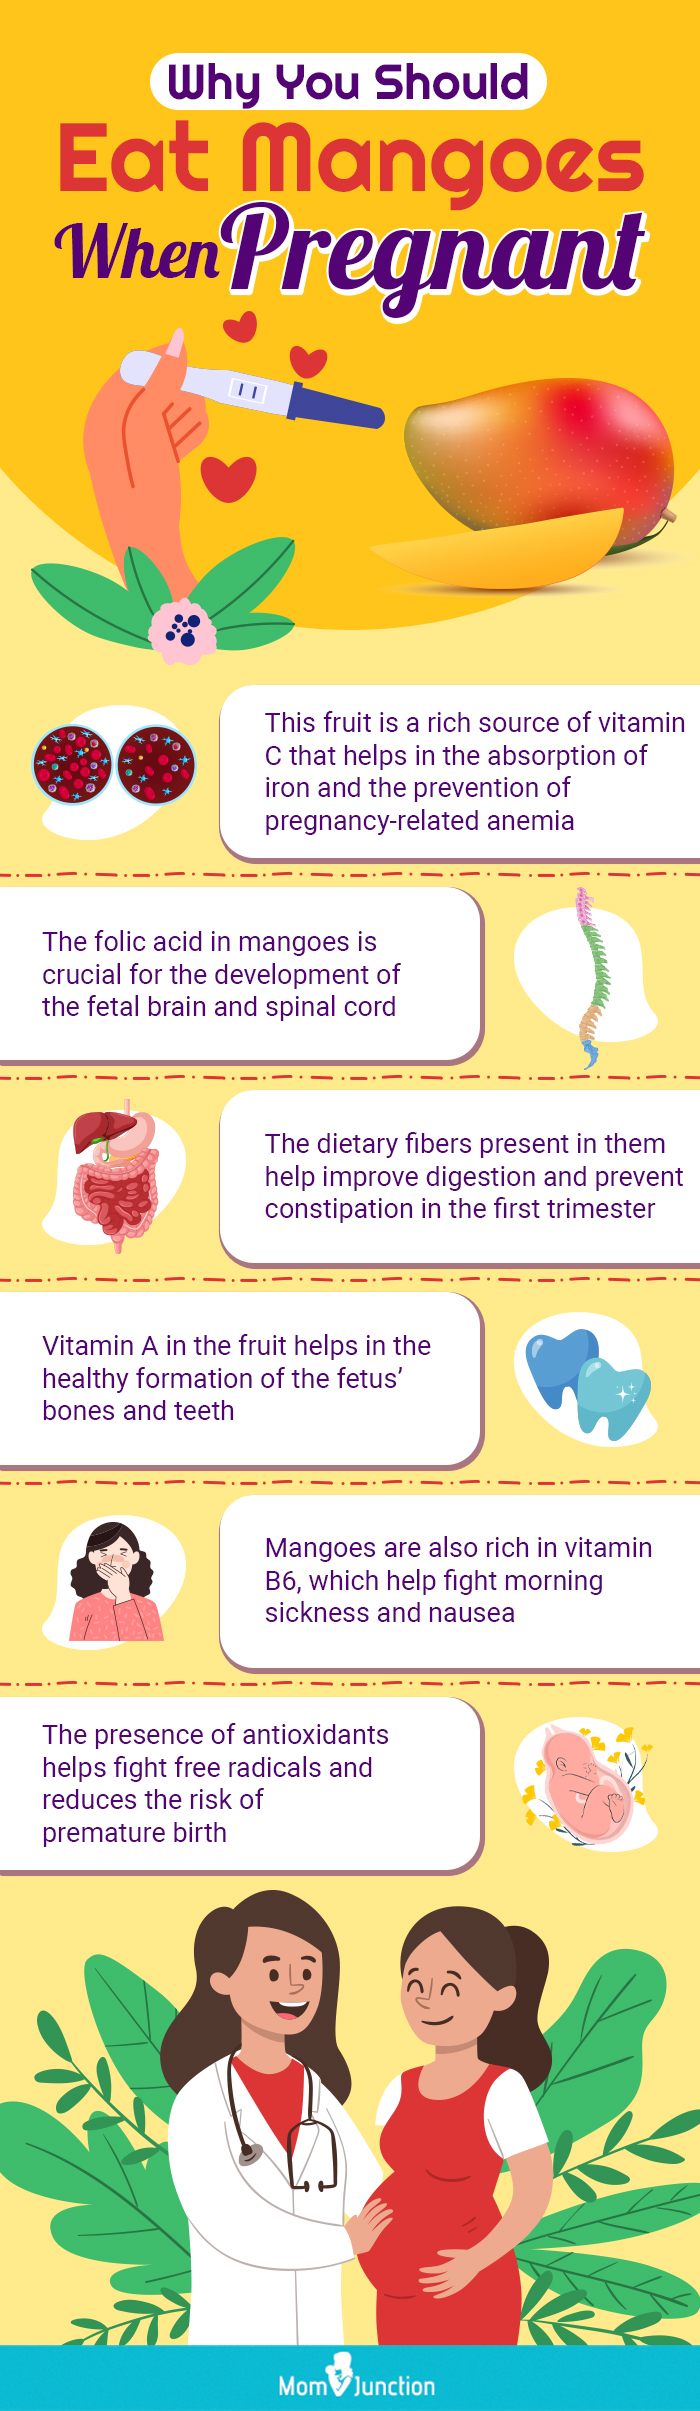 why you should eat mangoes when pregnant (infographic)